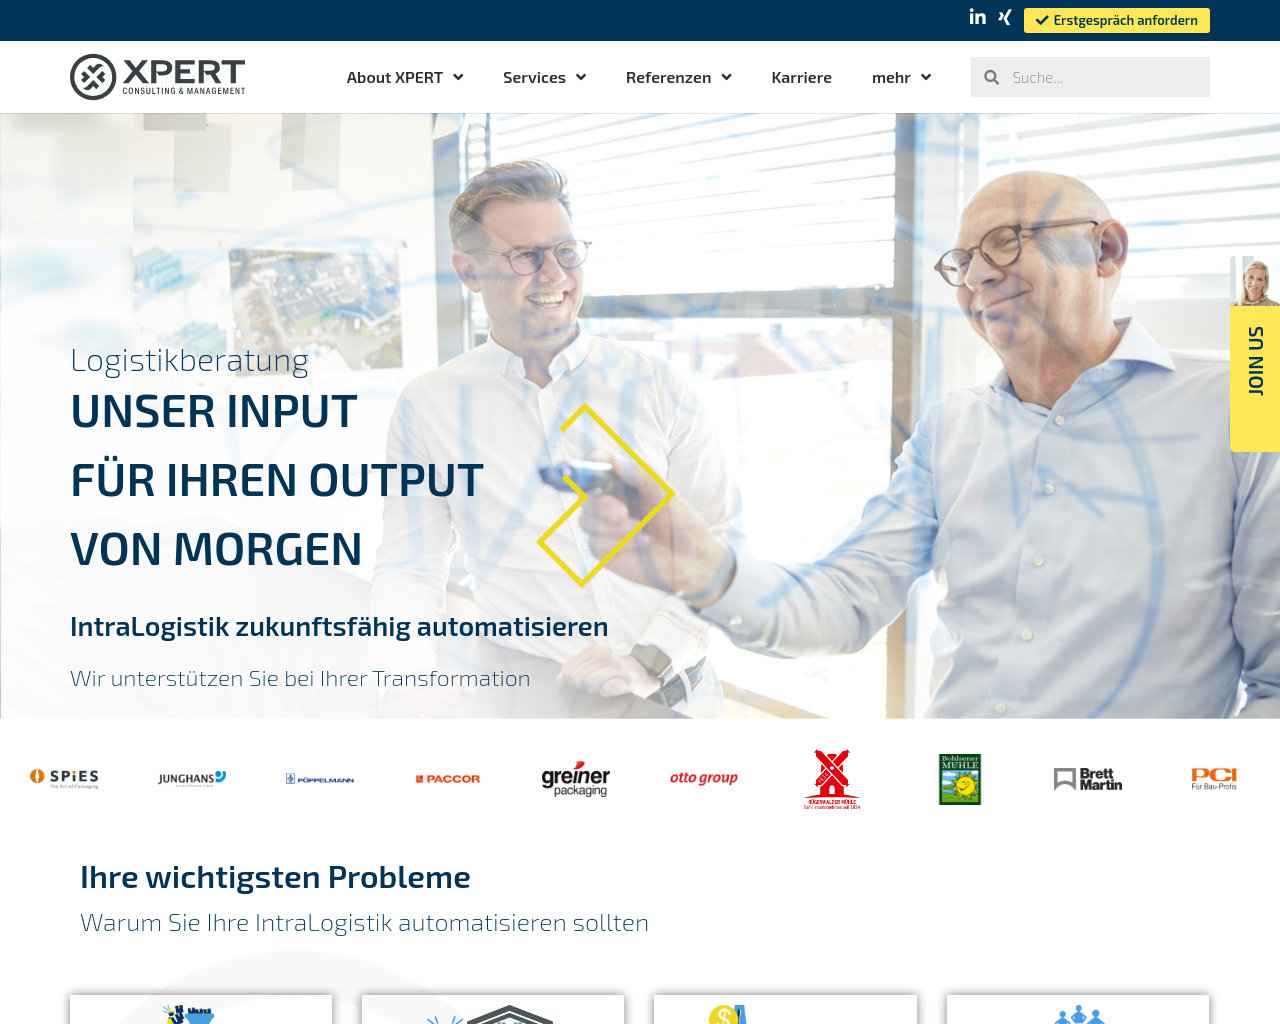 xpert.consulting